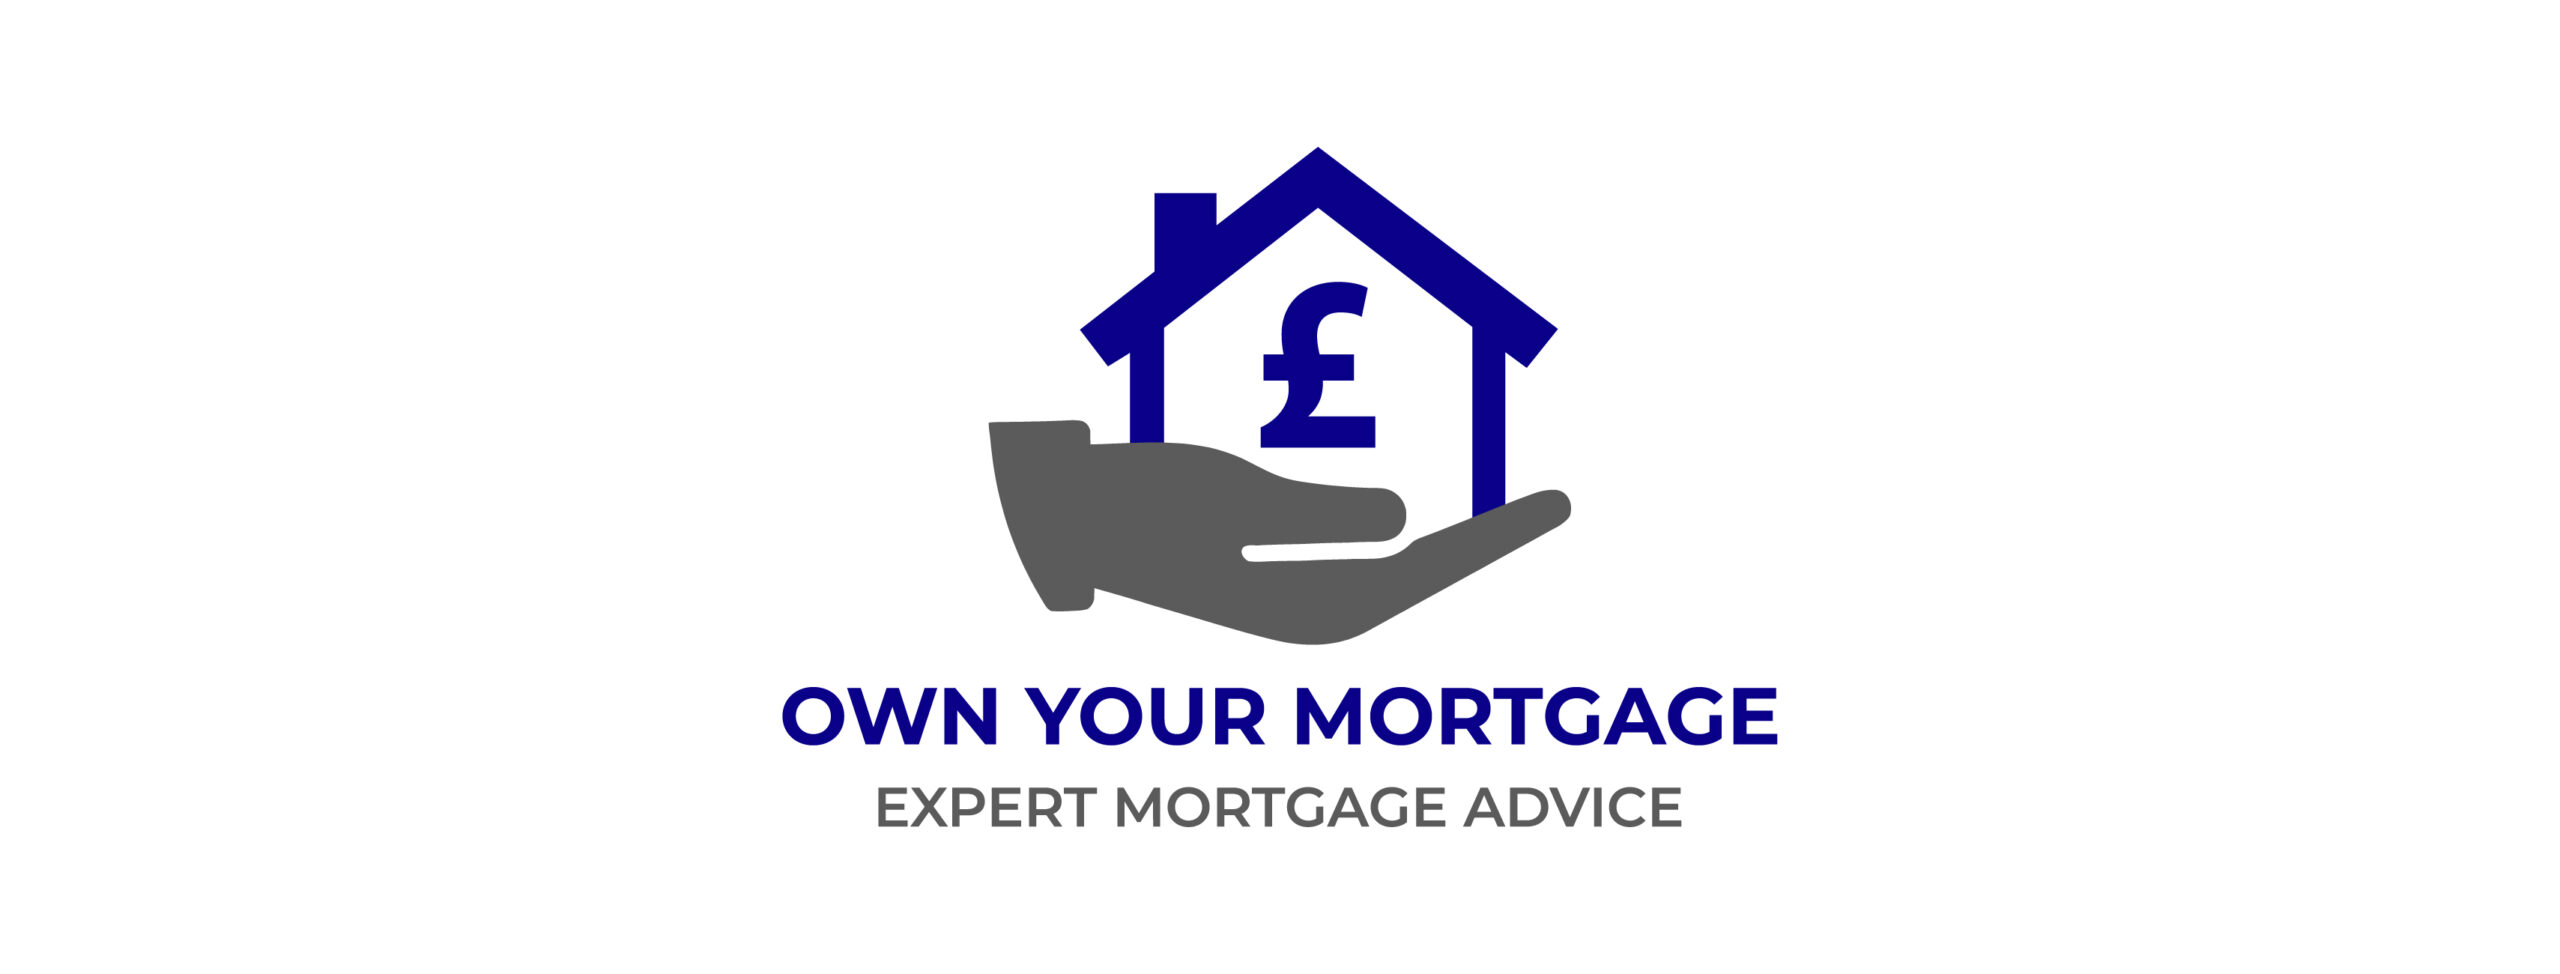 Own Your Mortgage